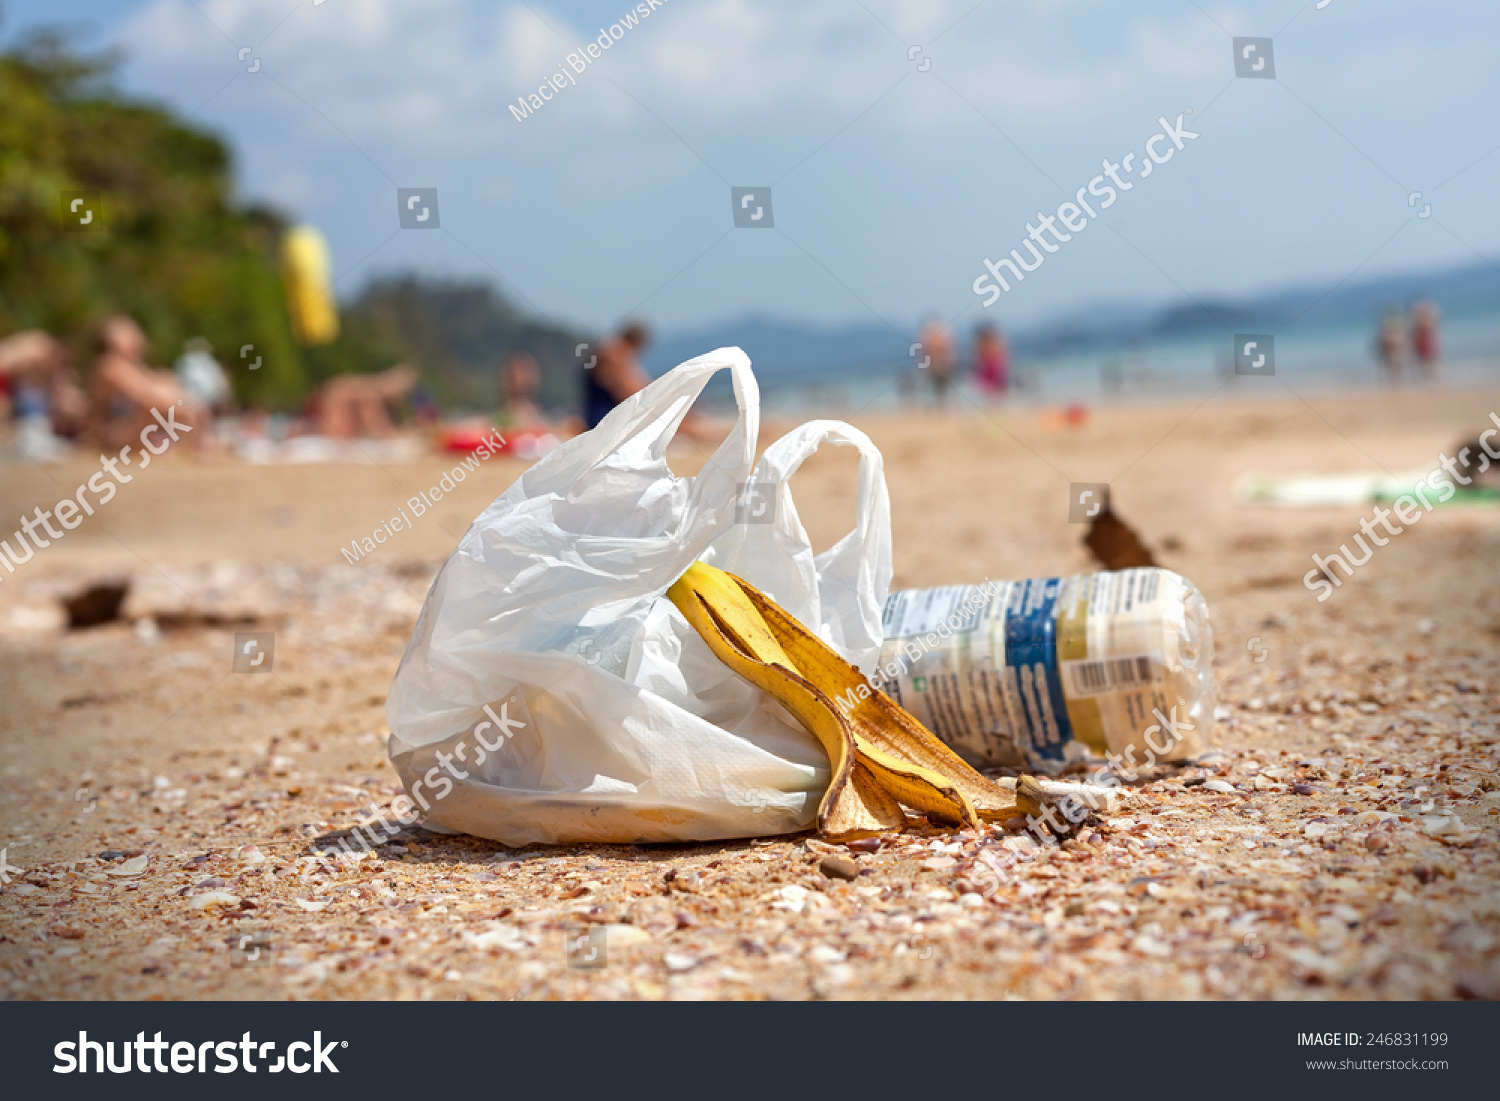 Garbage On A Beach, Environmental Pollution Concept Picture. Stock ...